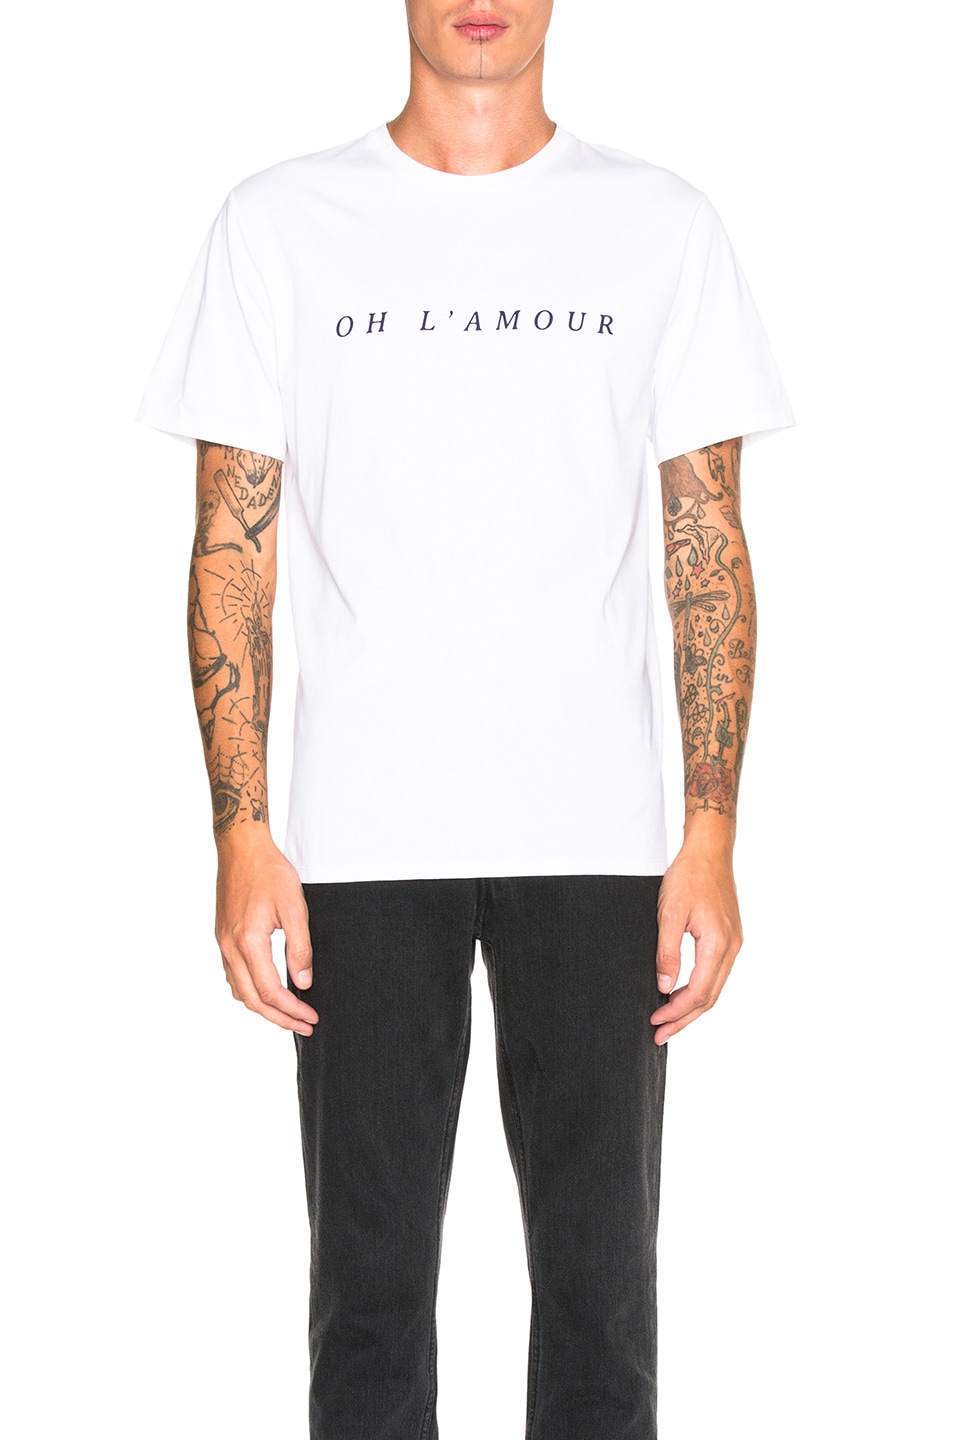 Image 1 of A.P.C. Oh L'Amour Tee in White